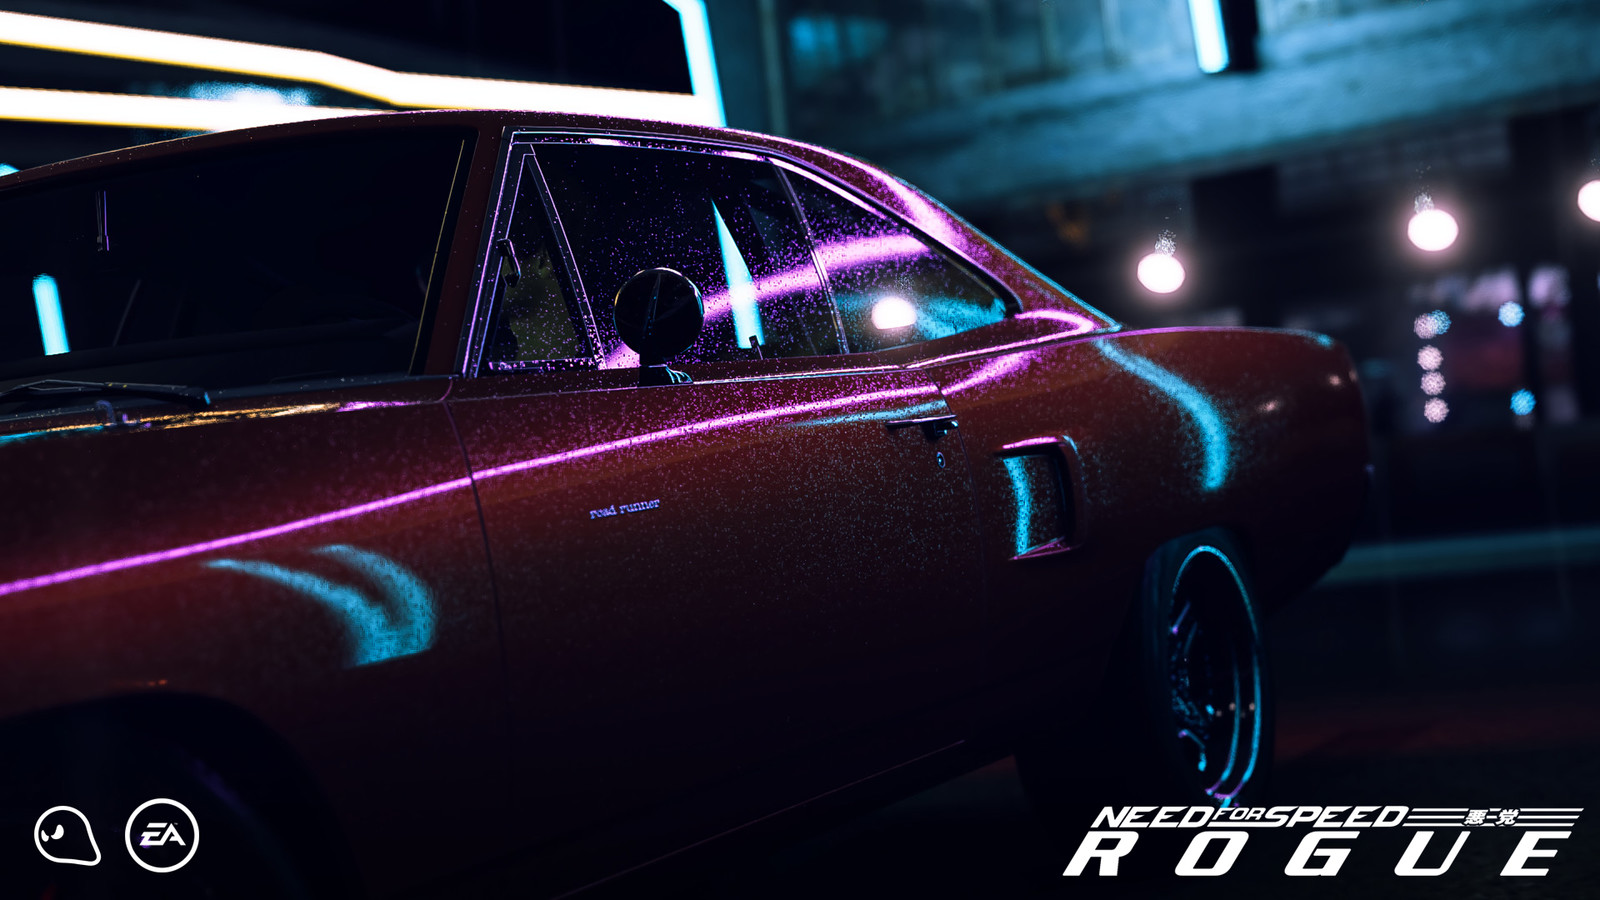 Need for Speed Rogue (Promo Image - 3) [Original Image by Jakob Garcia]